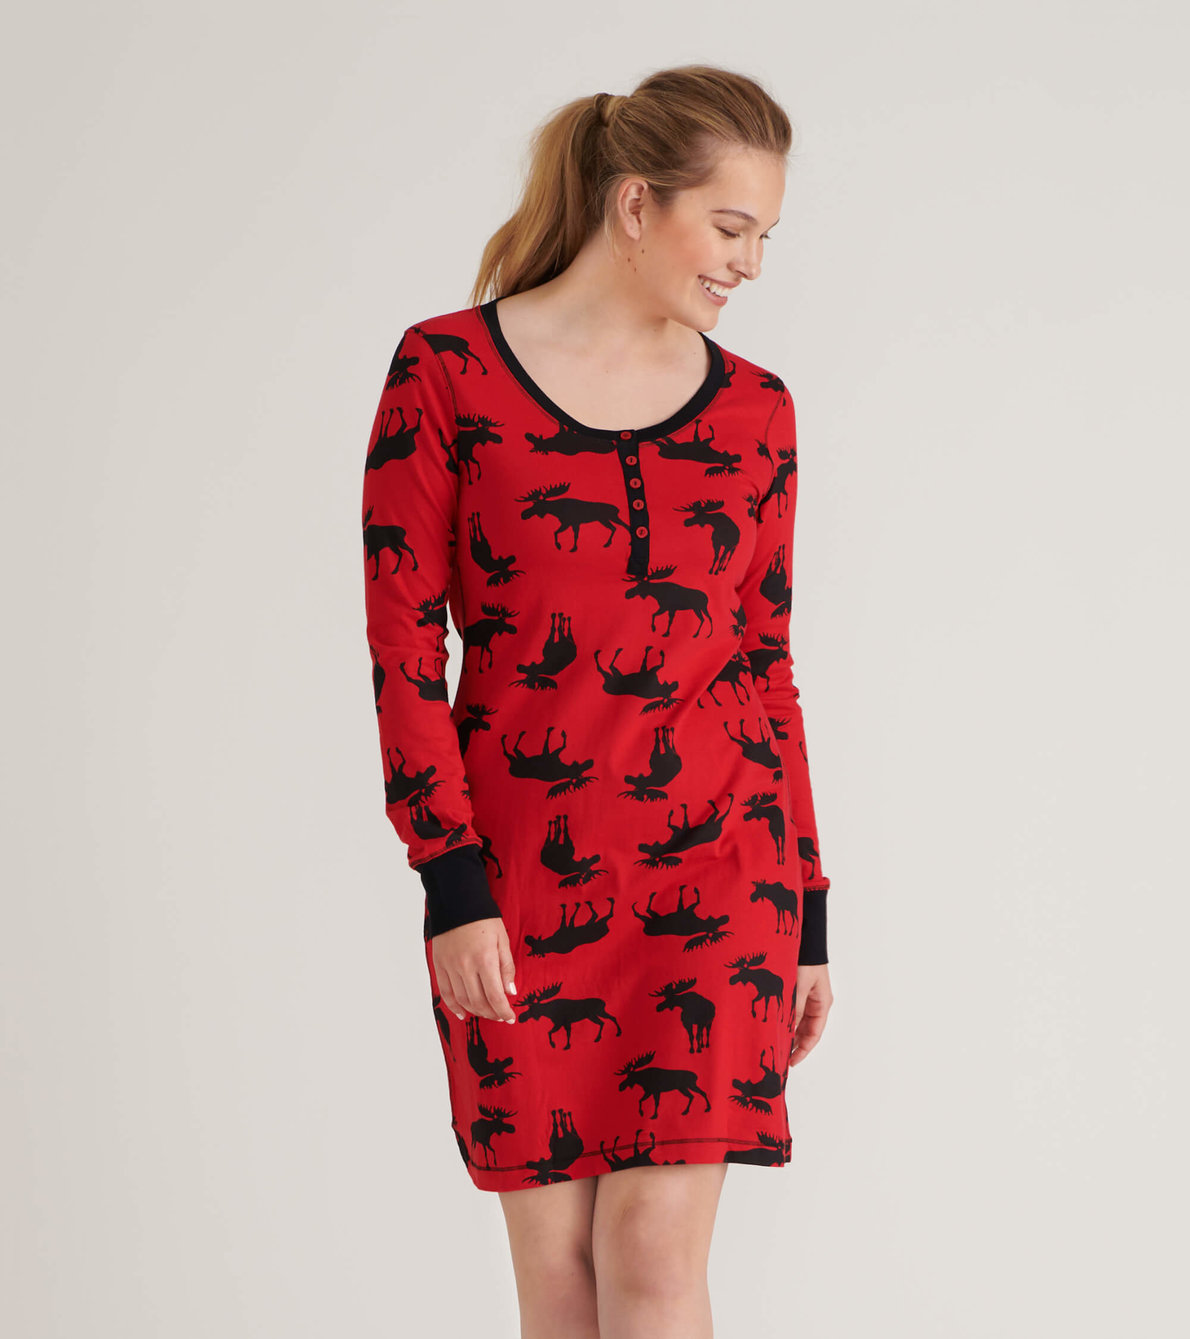 View larger image of Moose on Red Women's Nightdress